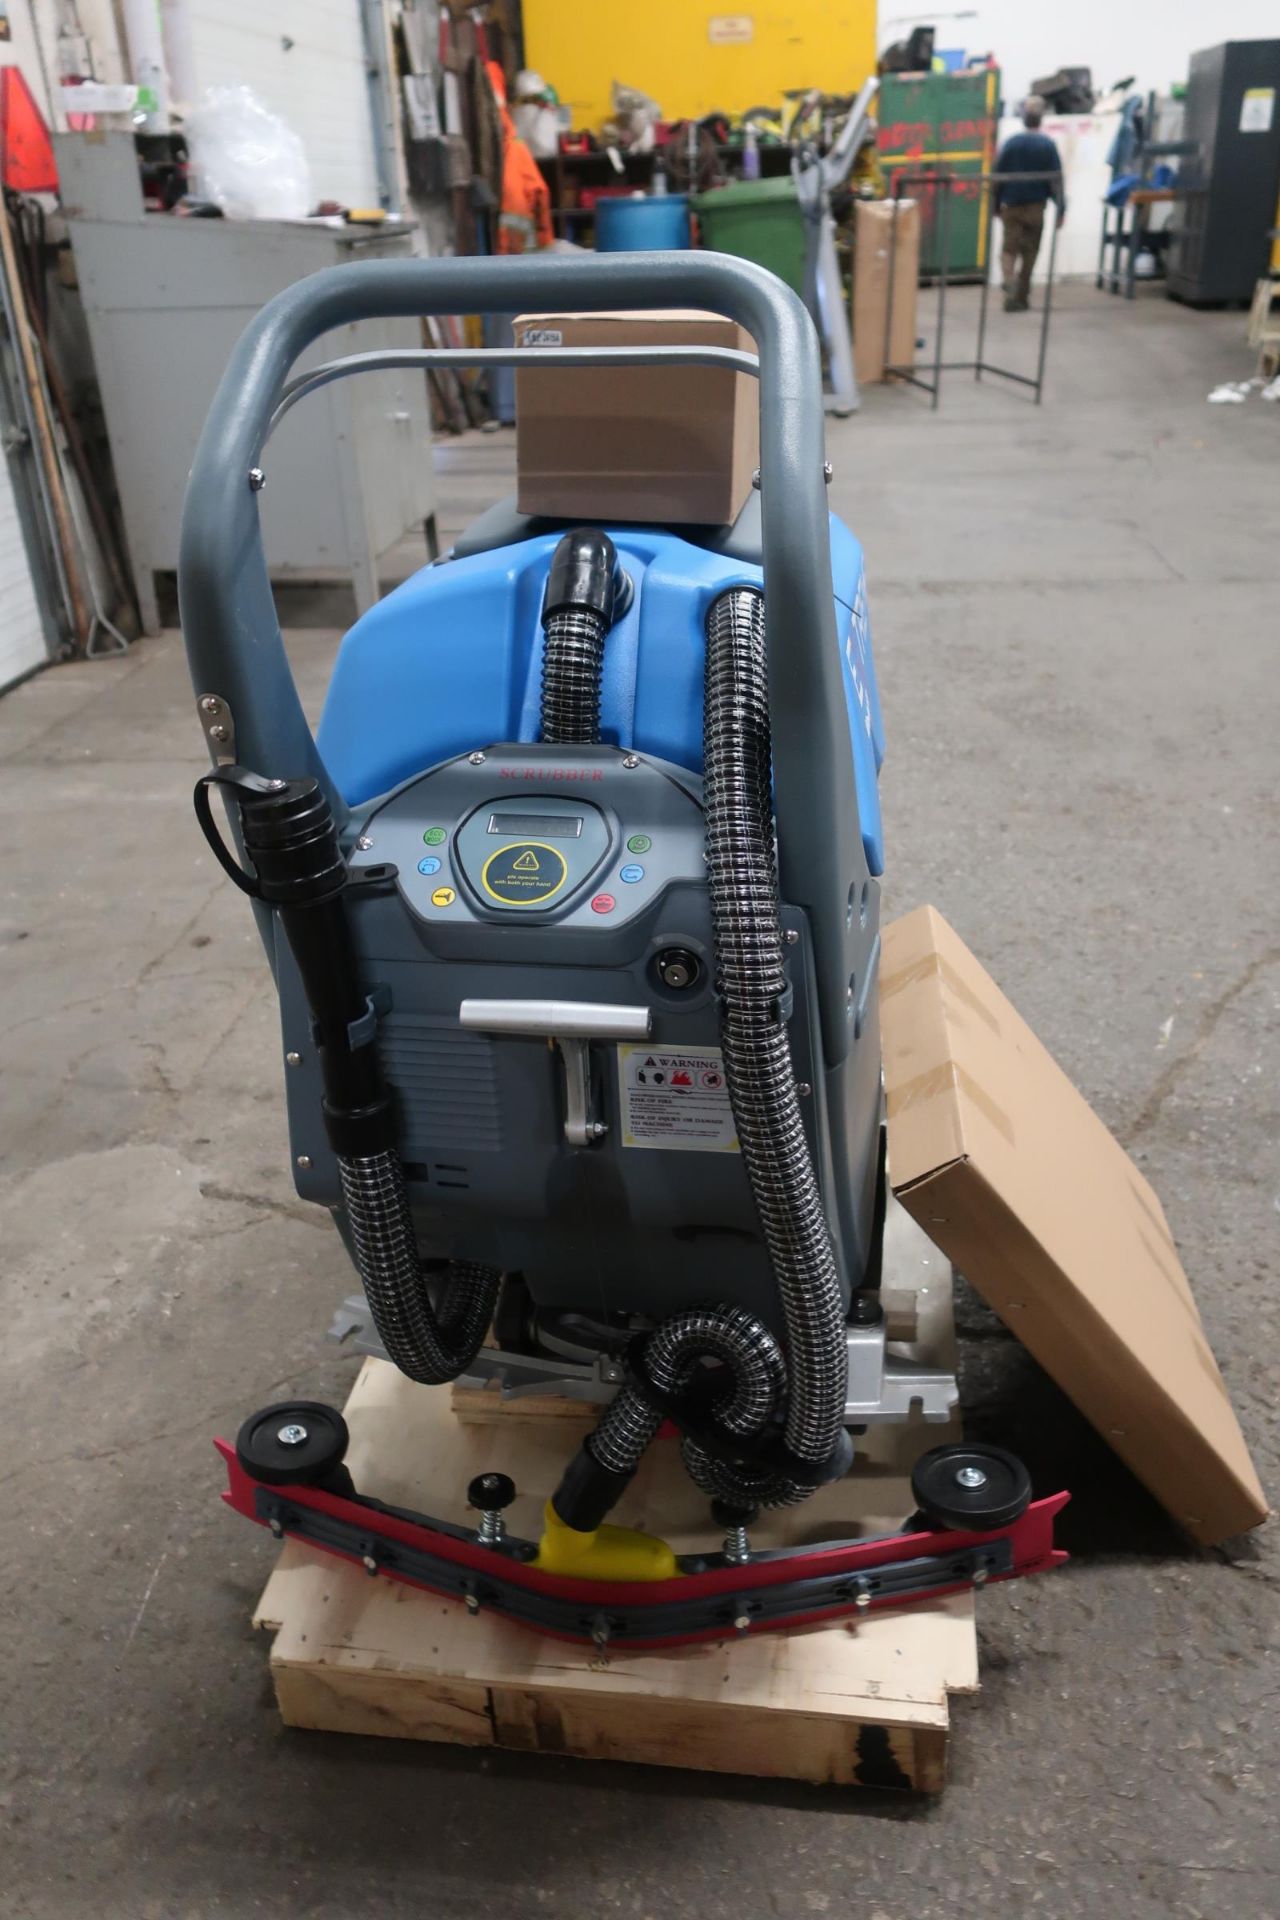 Extreme MINT Walk Behind Floor Sweeper Scrubber Unit model X6 - BRAND NEW with extra pads, digital - Image 4 of 4